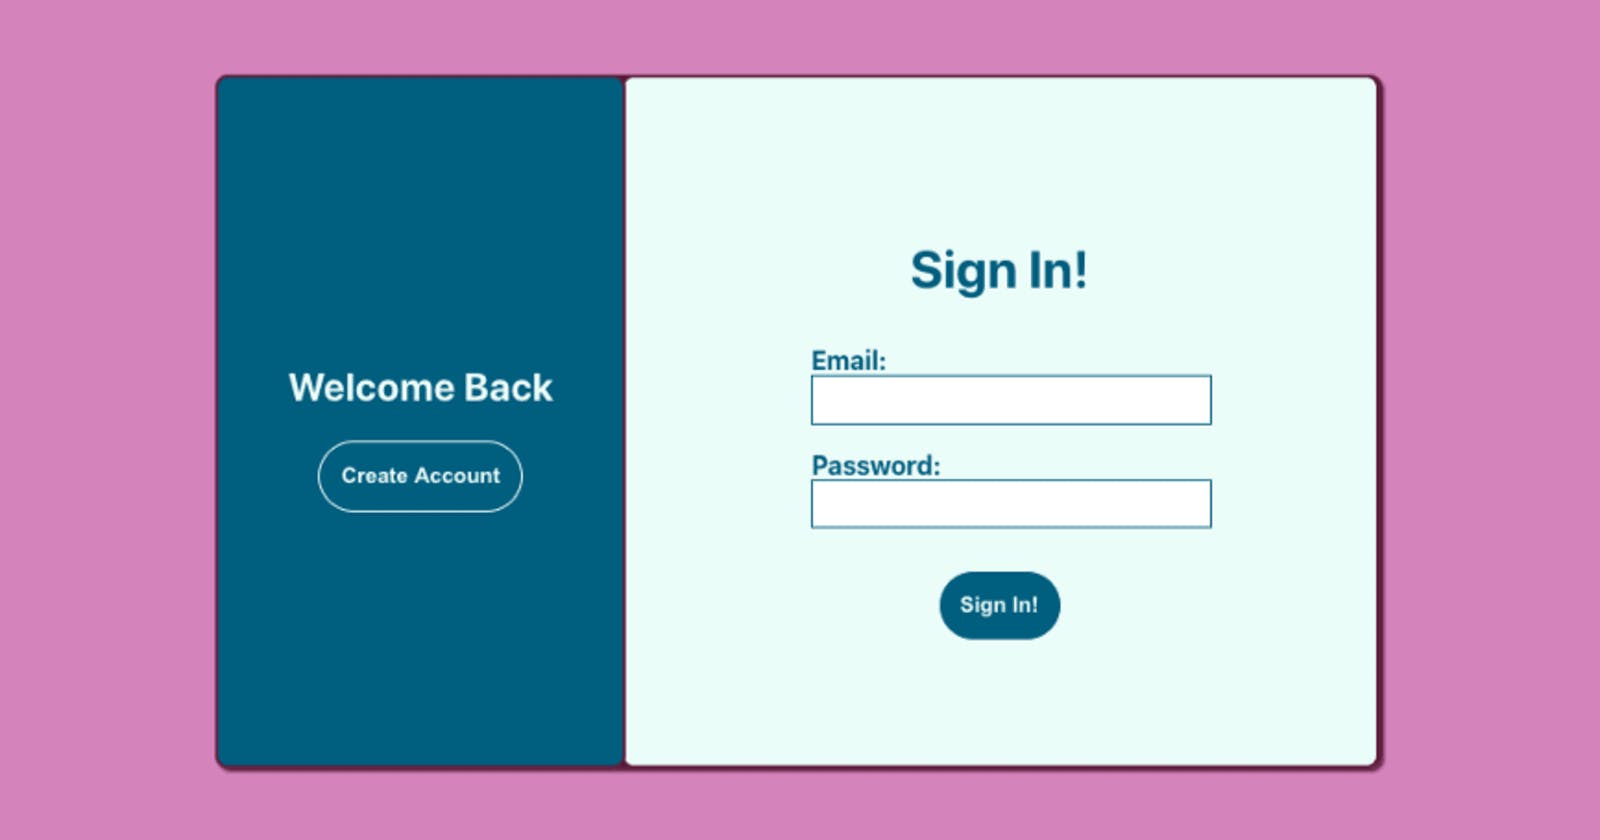 A simple form using react Js